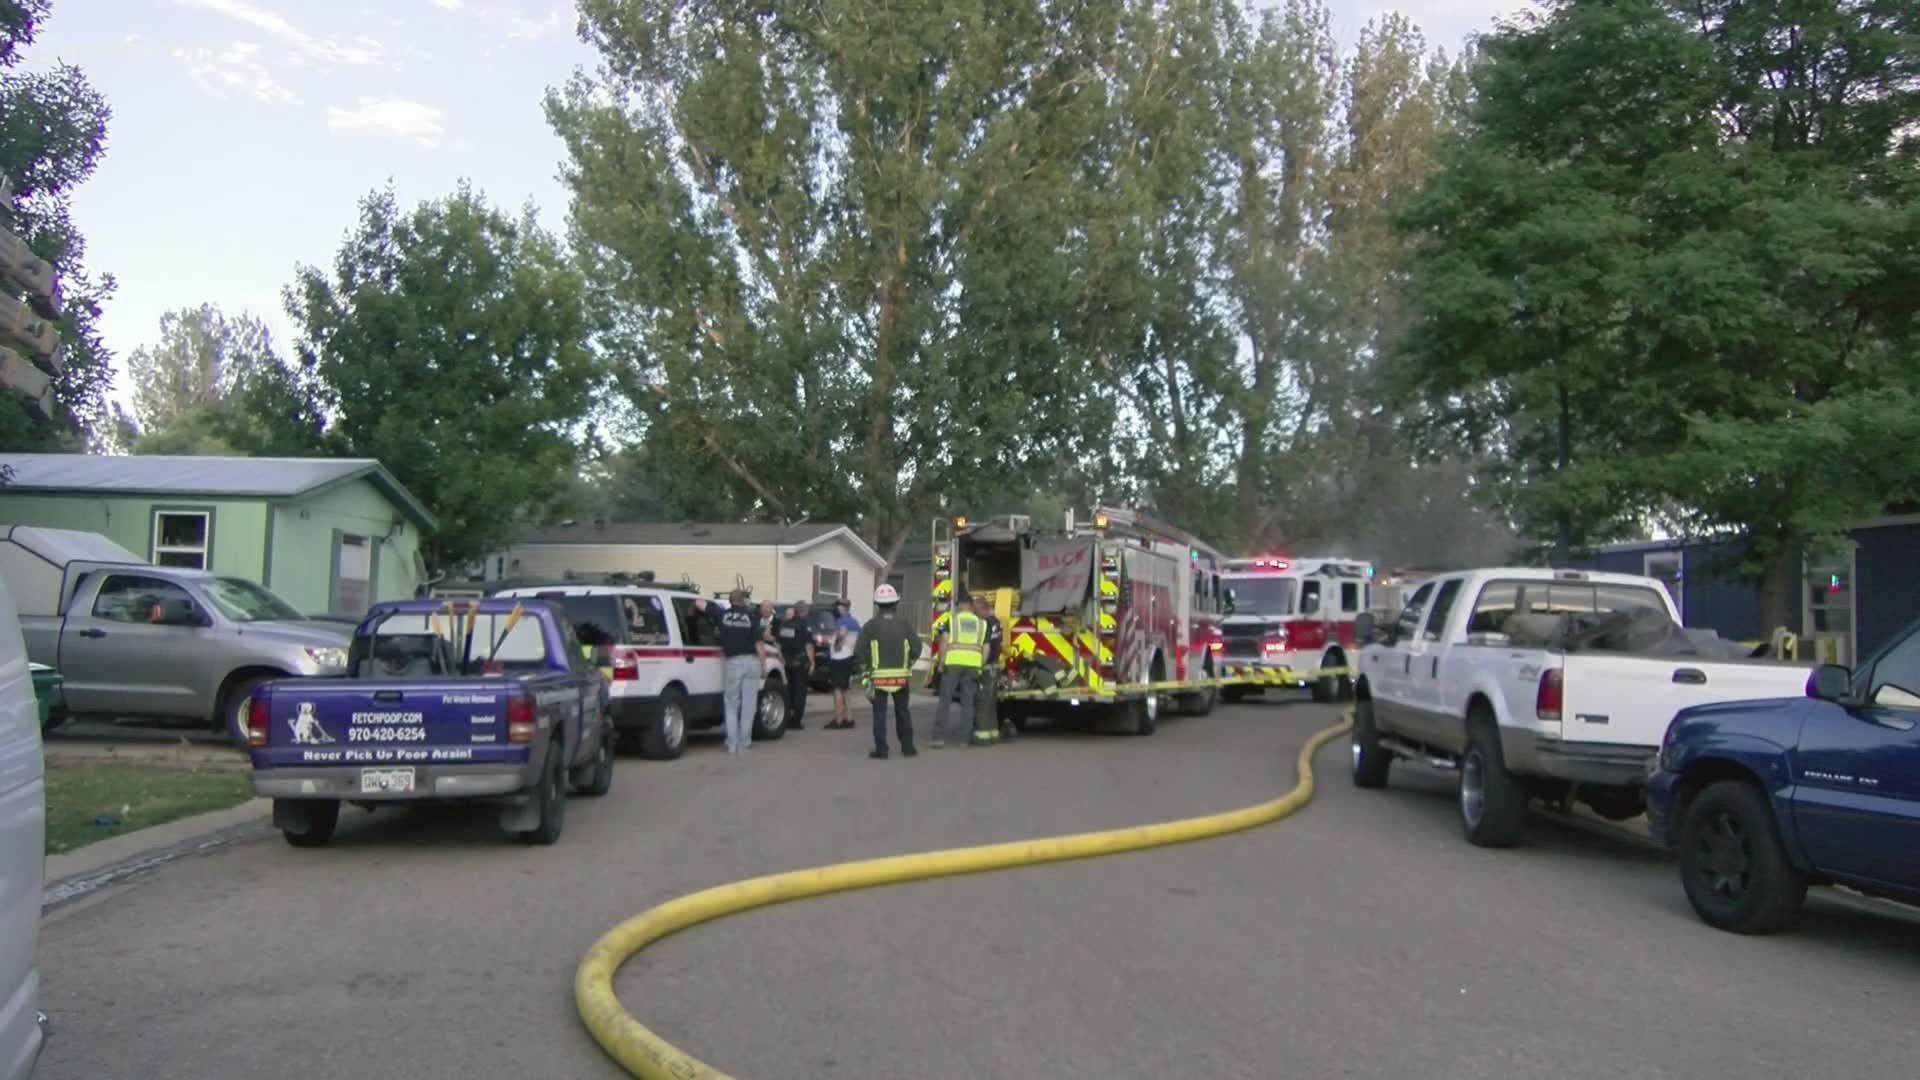 Police and firefighters in Fort Collins are investigating a deadly fire on the 2500 block of East Harmony, not far from Timberline Road. One person died.